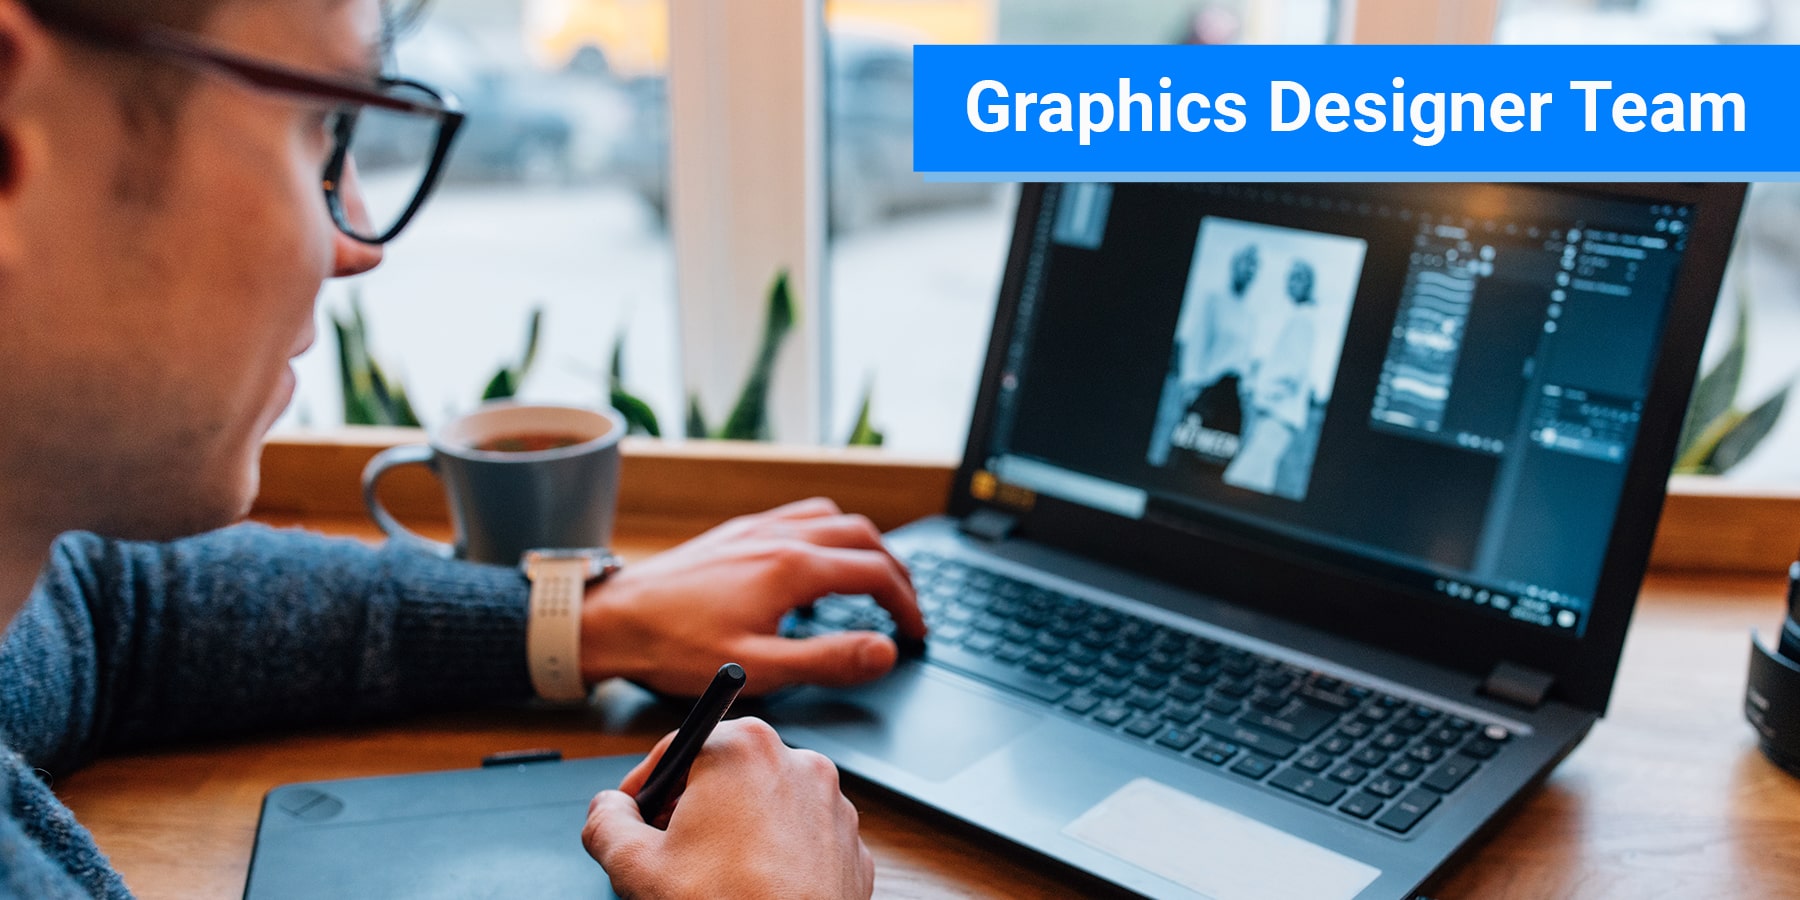 How Do You Find the Right Graphics Designer Team for Your Business Needs?